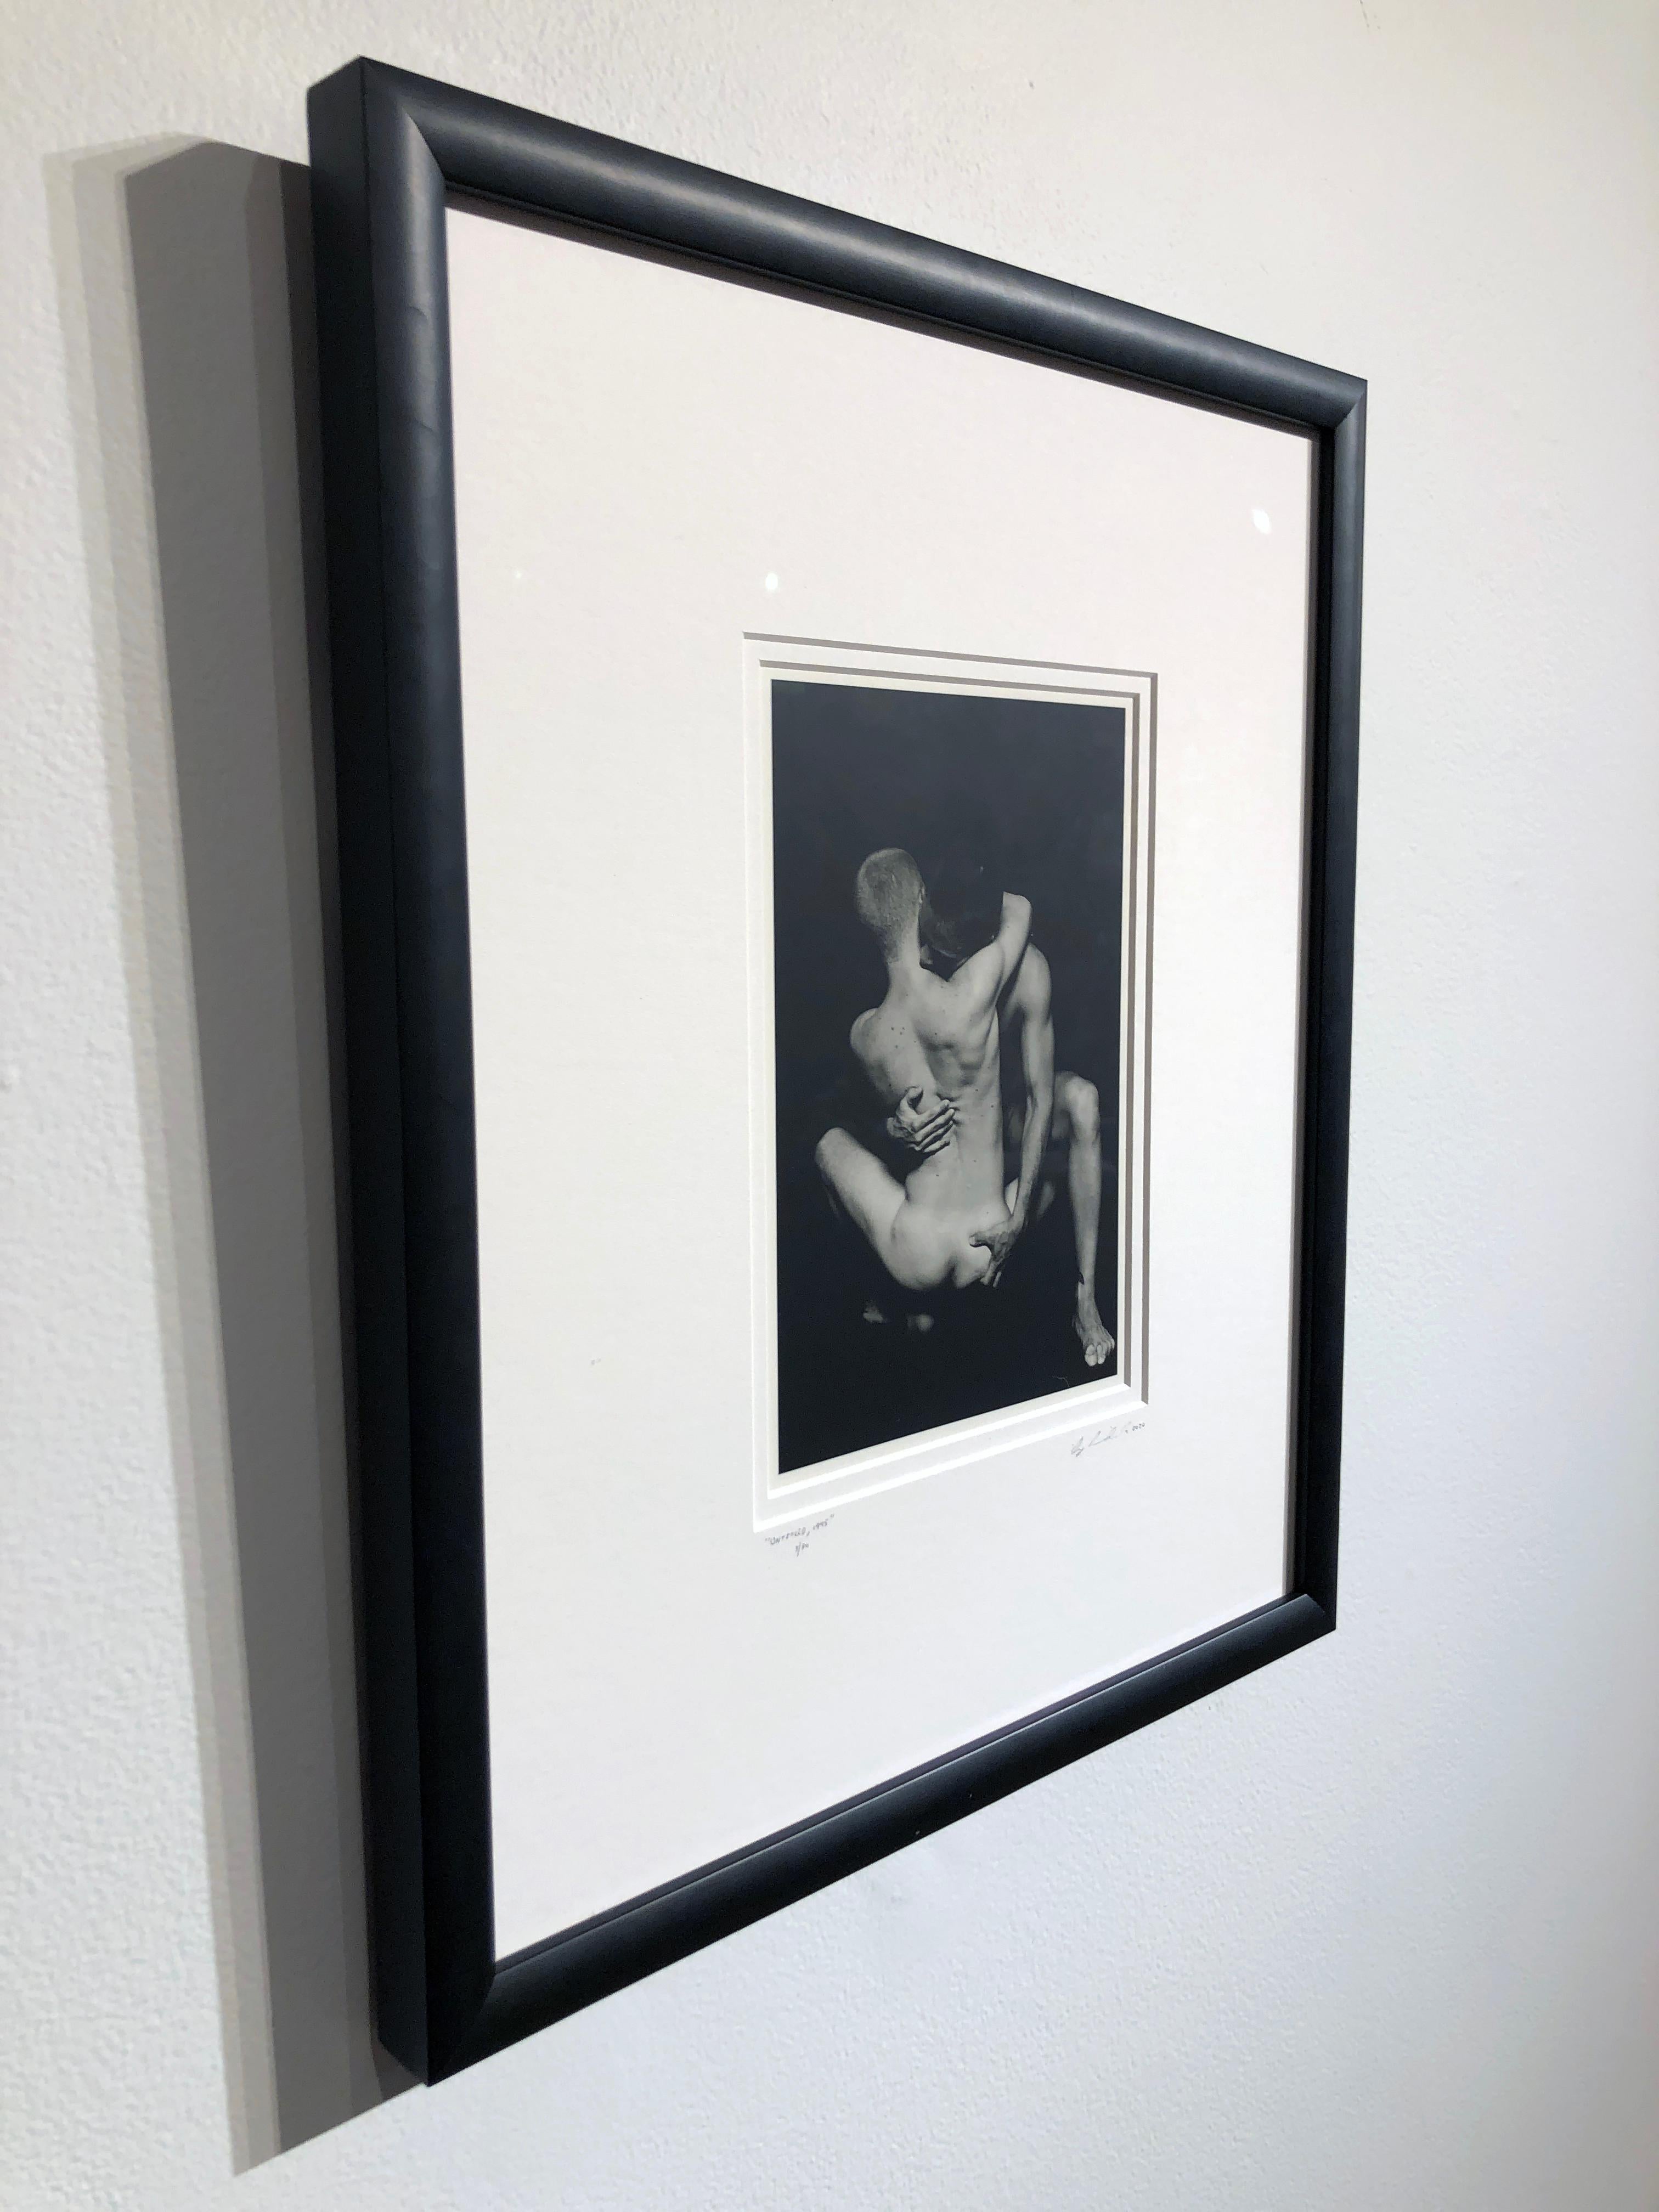 This intimate photograph shows two figures embracing, their faces are hidden, adding to its mystery.  The photo is custom matted  and framed in a black frame with non reflective museum glass.

Doug Birkenheuer
Untitled (Stone & Miles), 1995
silver